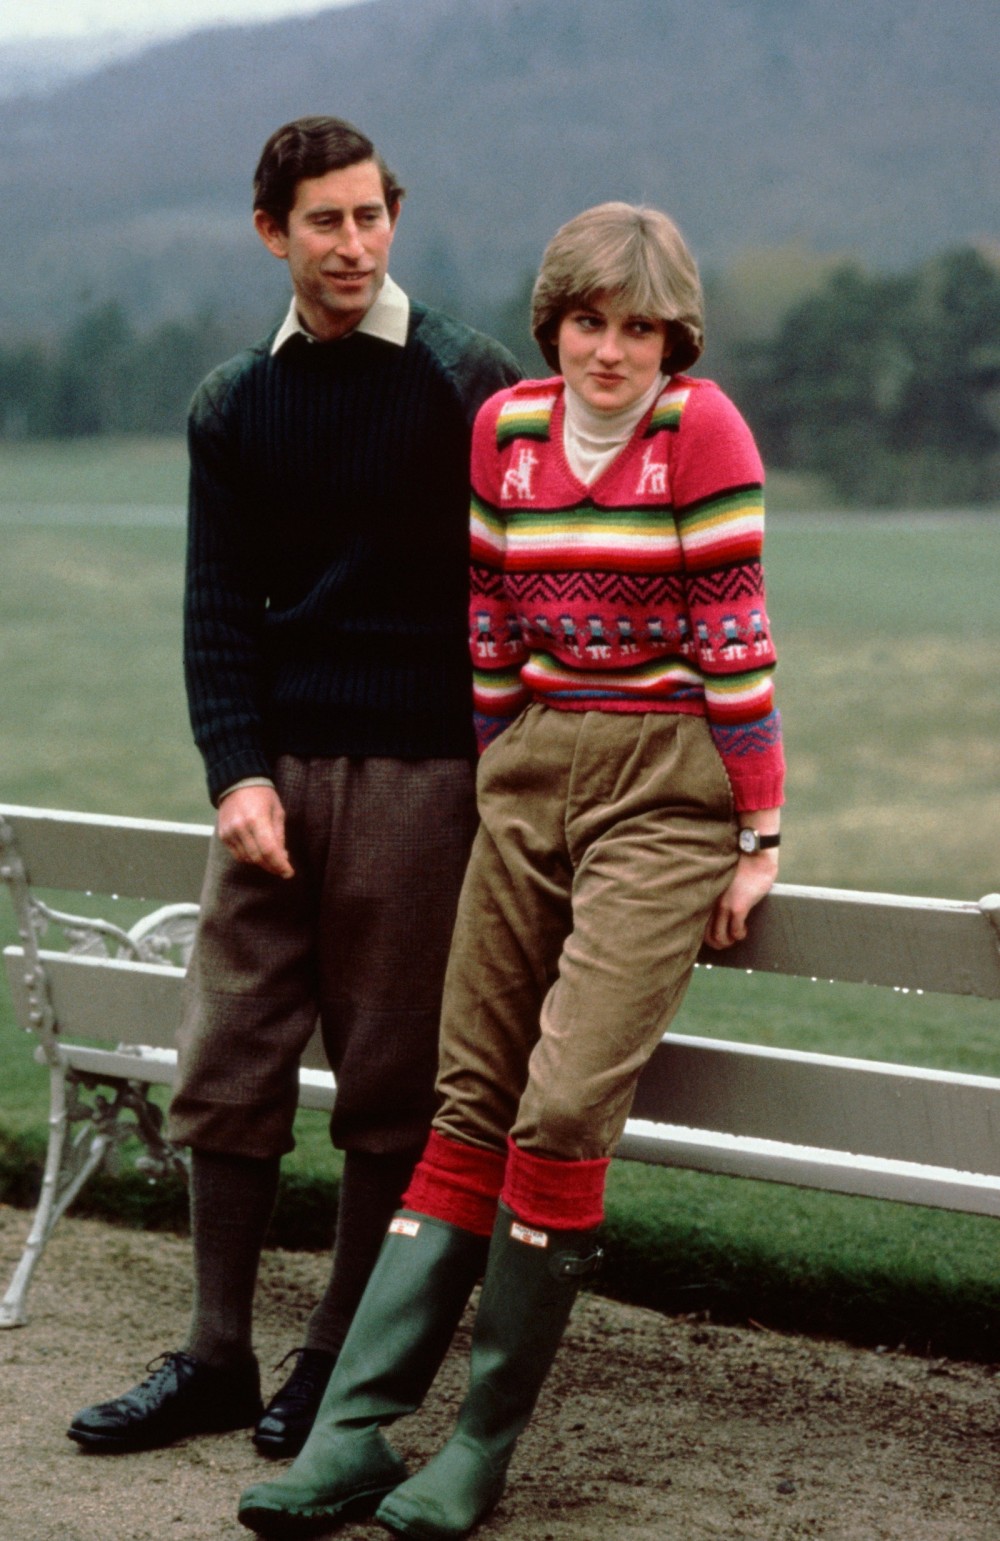 pPrince Charles and a thenLady Diana Spencer at Balmoral Castle in Scotland.p 